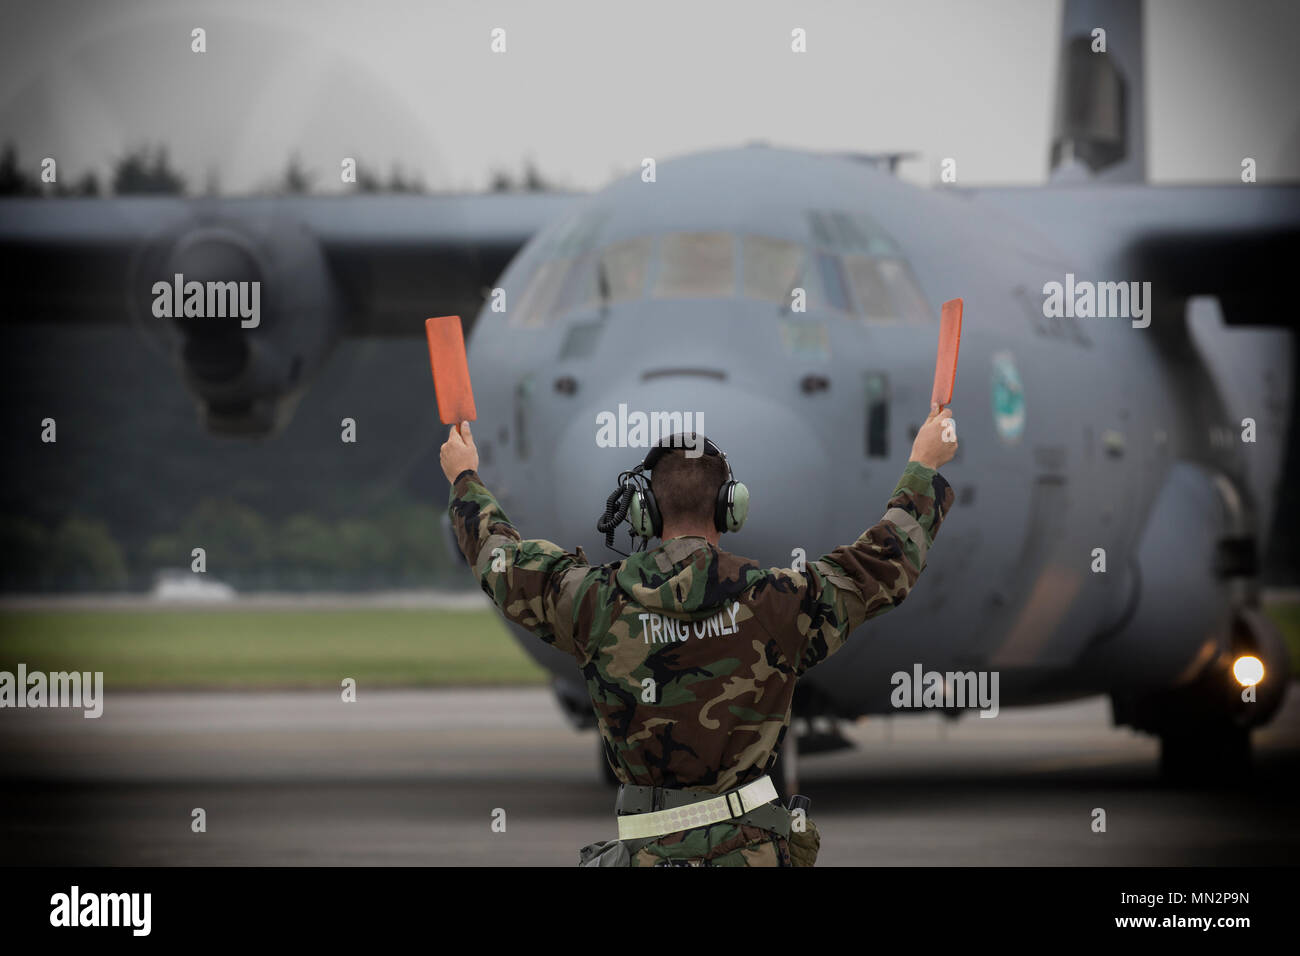 Senior Airman Kyle Knudsen, 374th Aircraft Maintenance Squadron crew chief, marshals a C-130J Super Hercules during Exercise Beverly Morning at Yokota Air Base, Japan, Aug. 18, 2017. The training is designed to test the ability of Airmen to survive in austere environments with chemical, biological, radiological, nuclear and explosive hazards. (U.S. Air Force photo by Yasuo Osakabe) Stock Photo